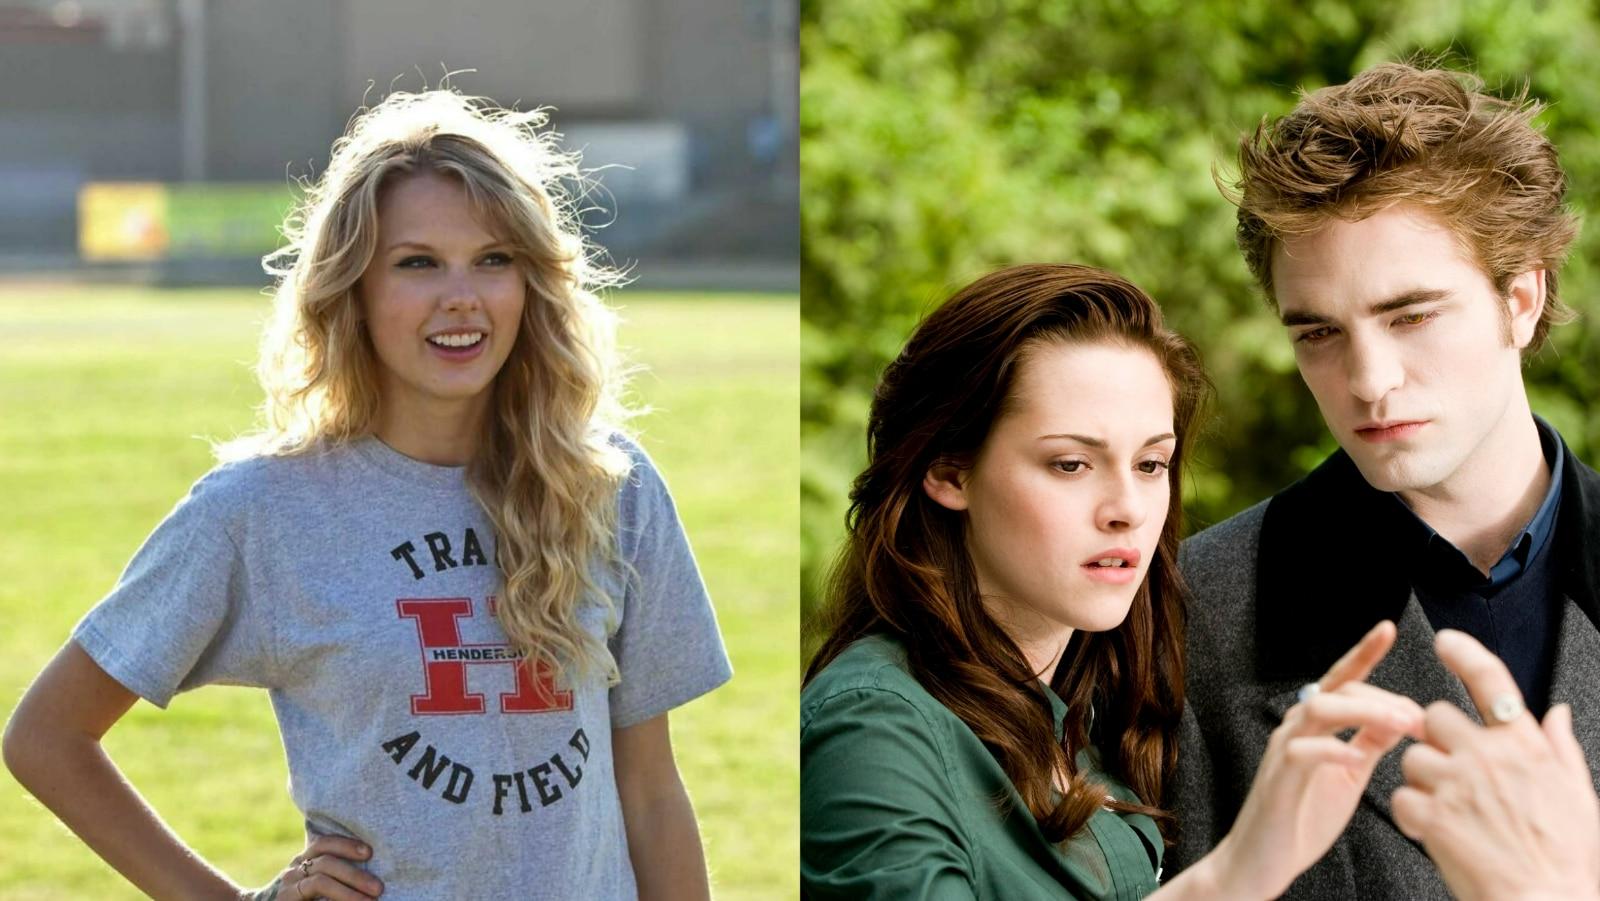 Taylor Swfit, Bella and Edward